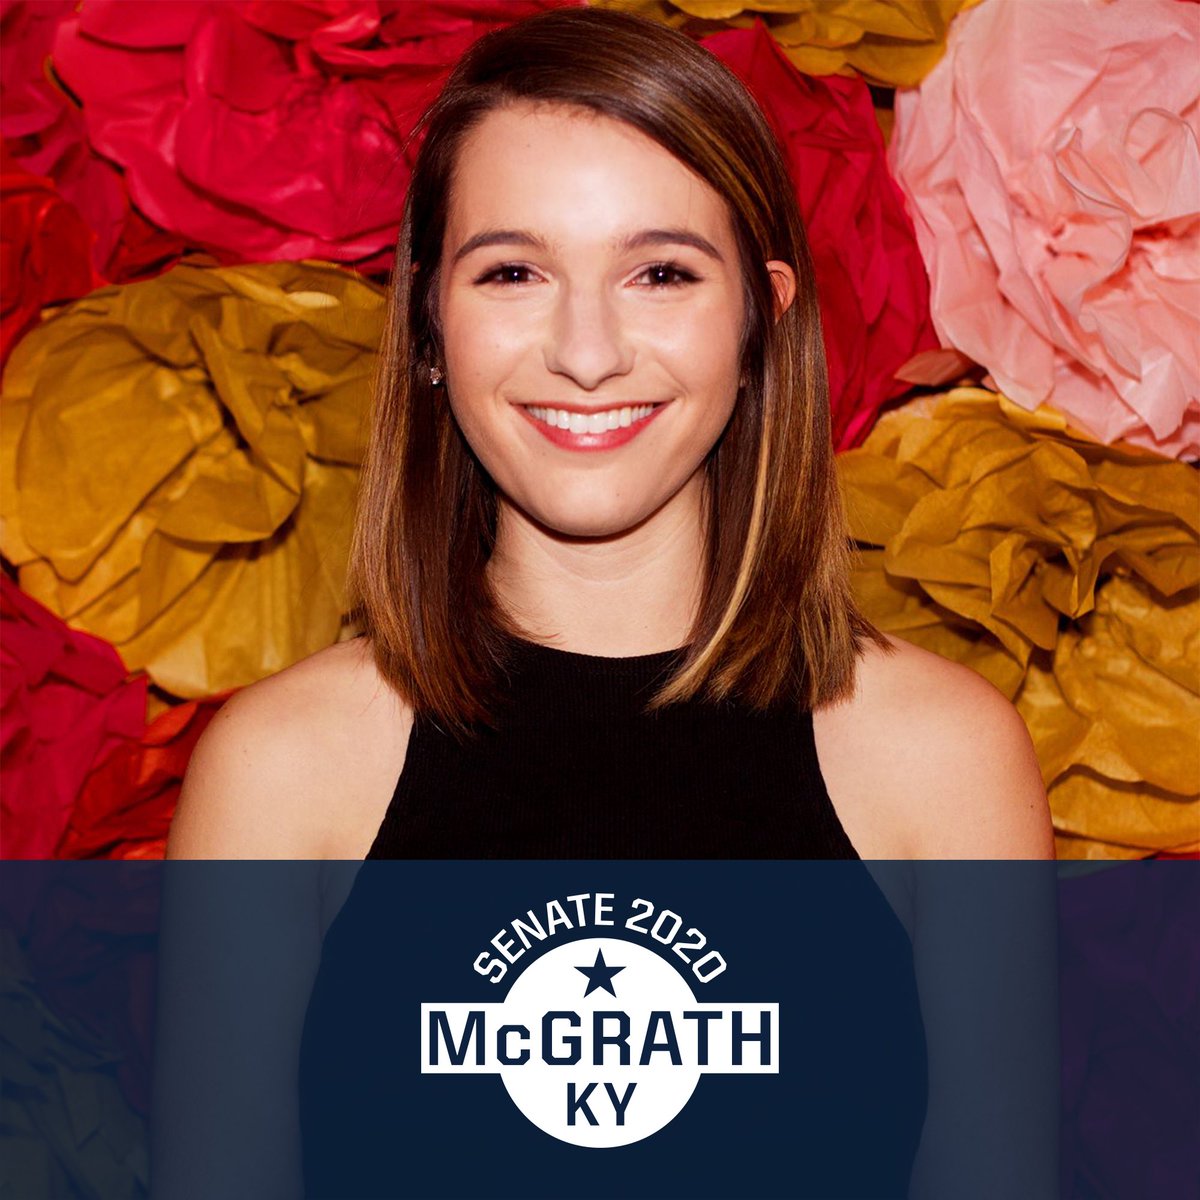  Update your Facebook profile picture  to use one of our frames by visiting  https://bit.ly/McGrath-Frames 